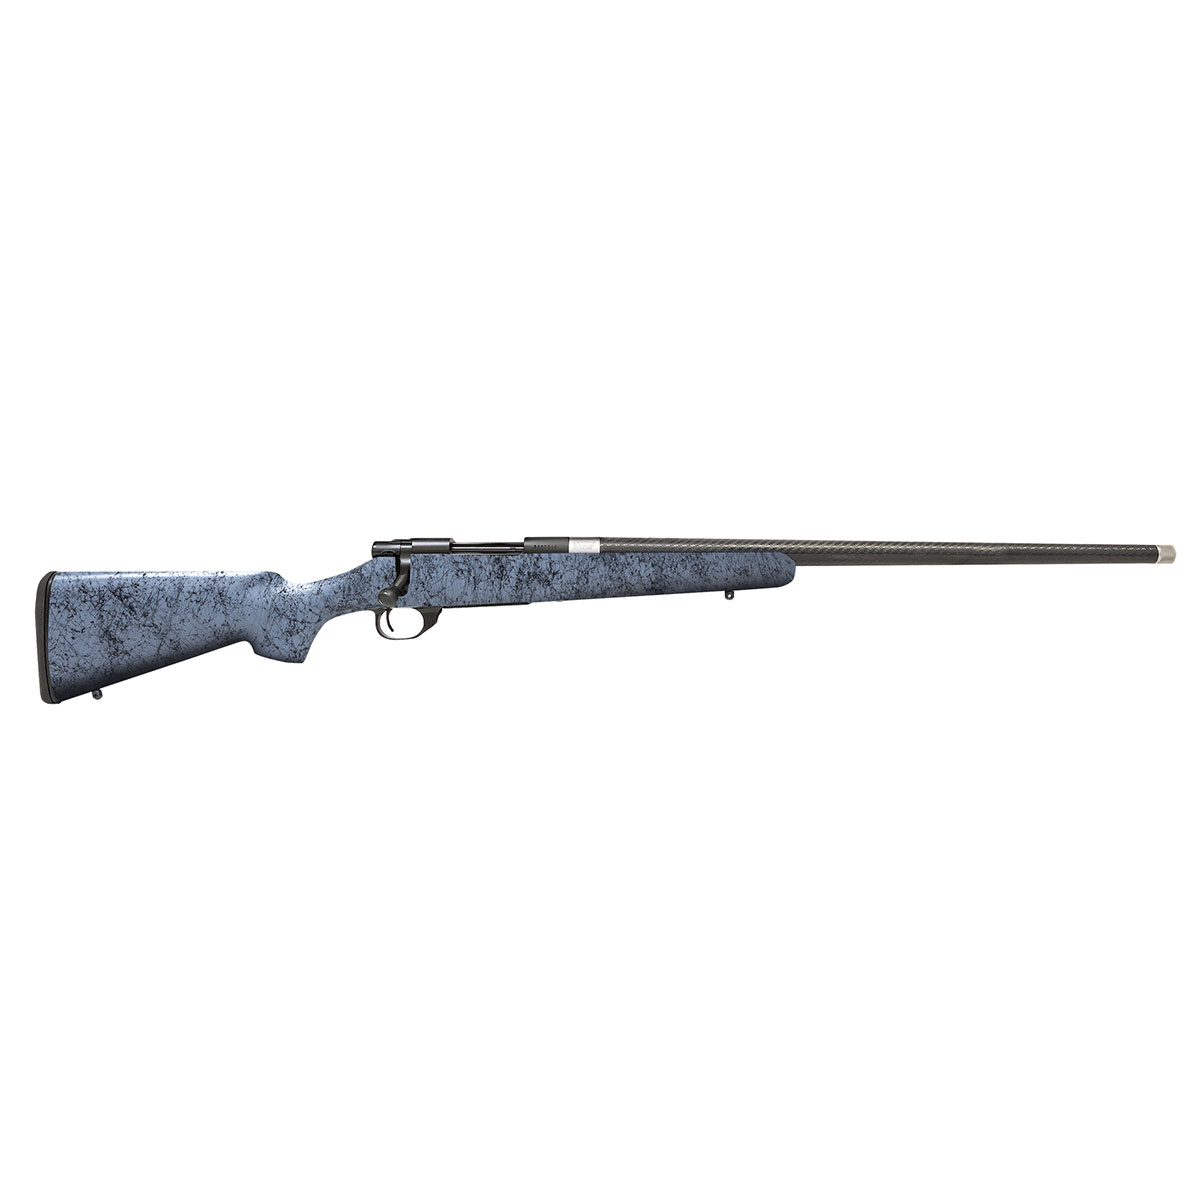 HOWA - M1500 CARBON ELEVATE 6.5 GRENDEL BOLT-ACTION RIFLE